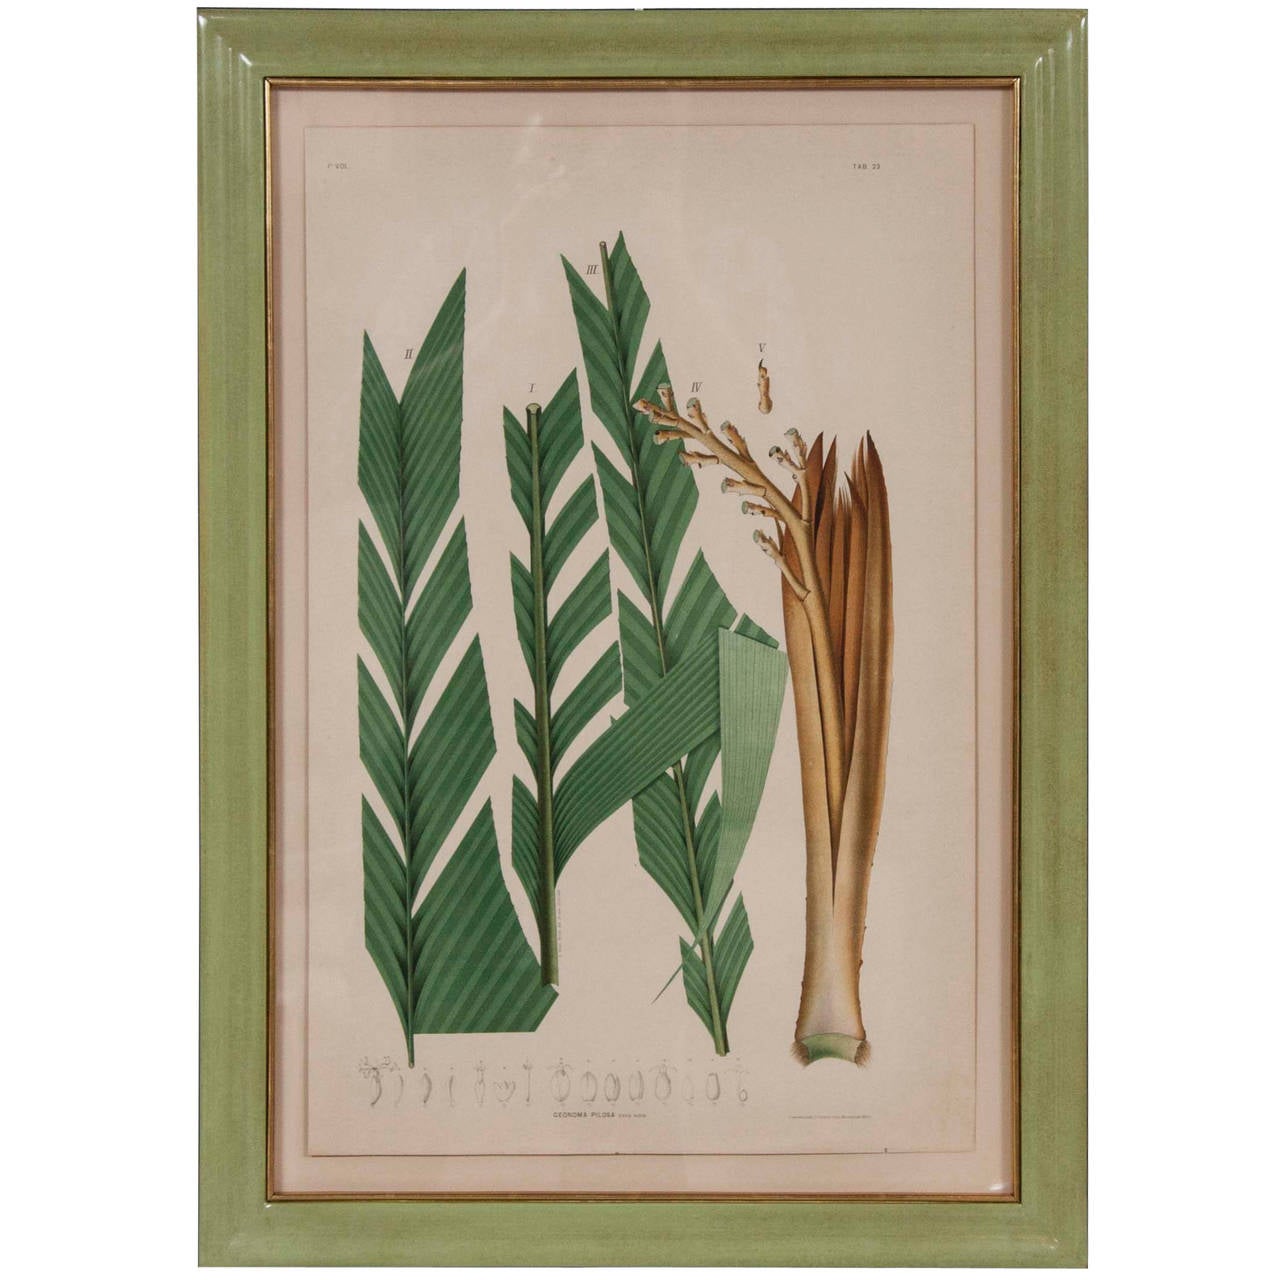 Chromolithograph Studies of Brazilian Palm Culture by Joao Rodrigues